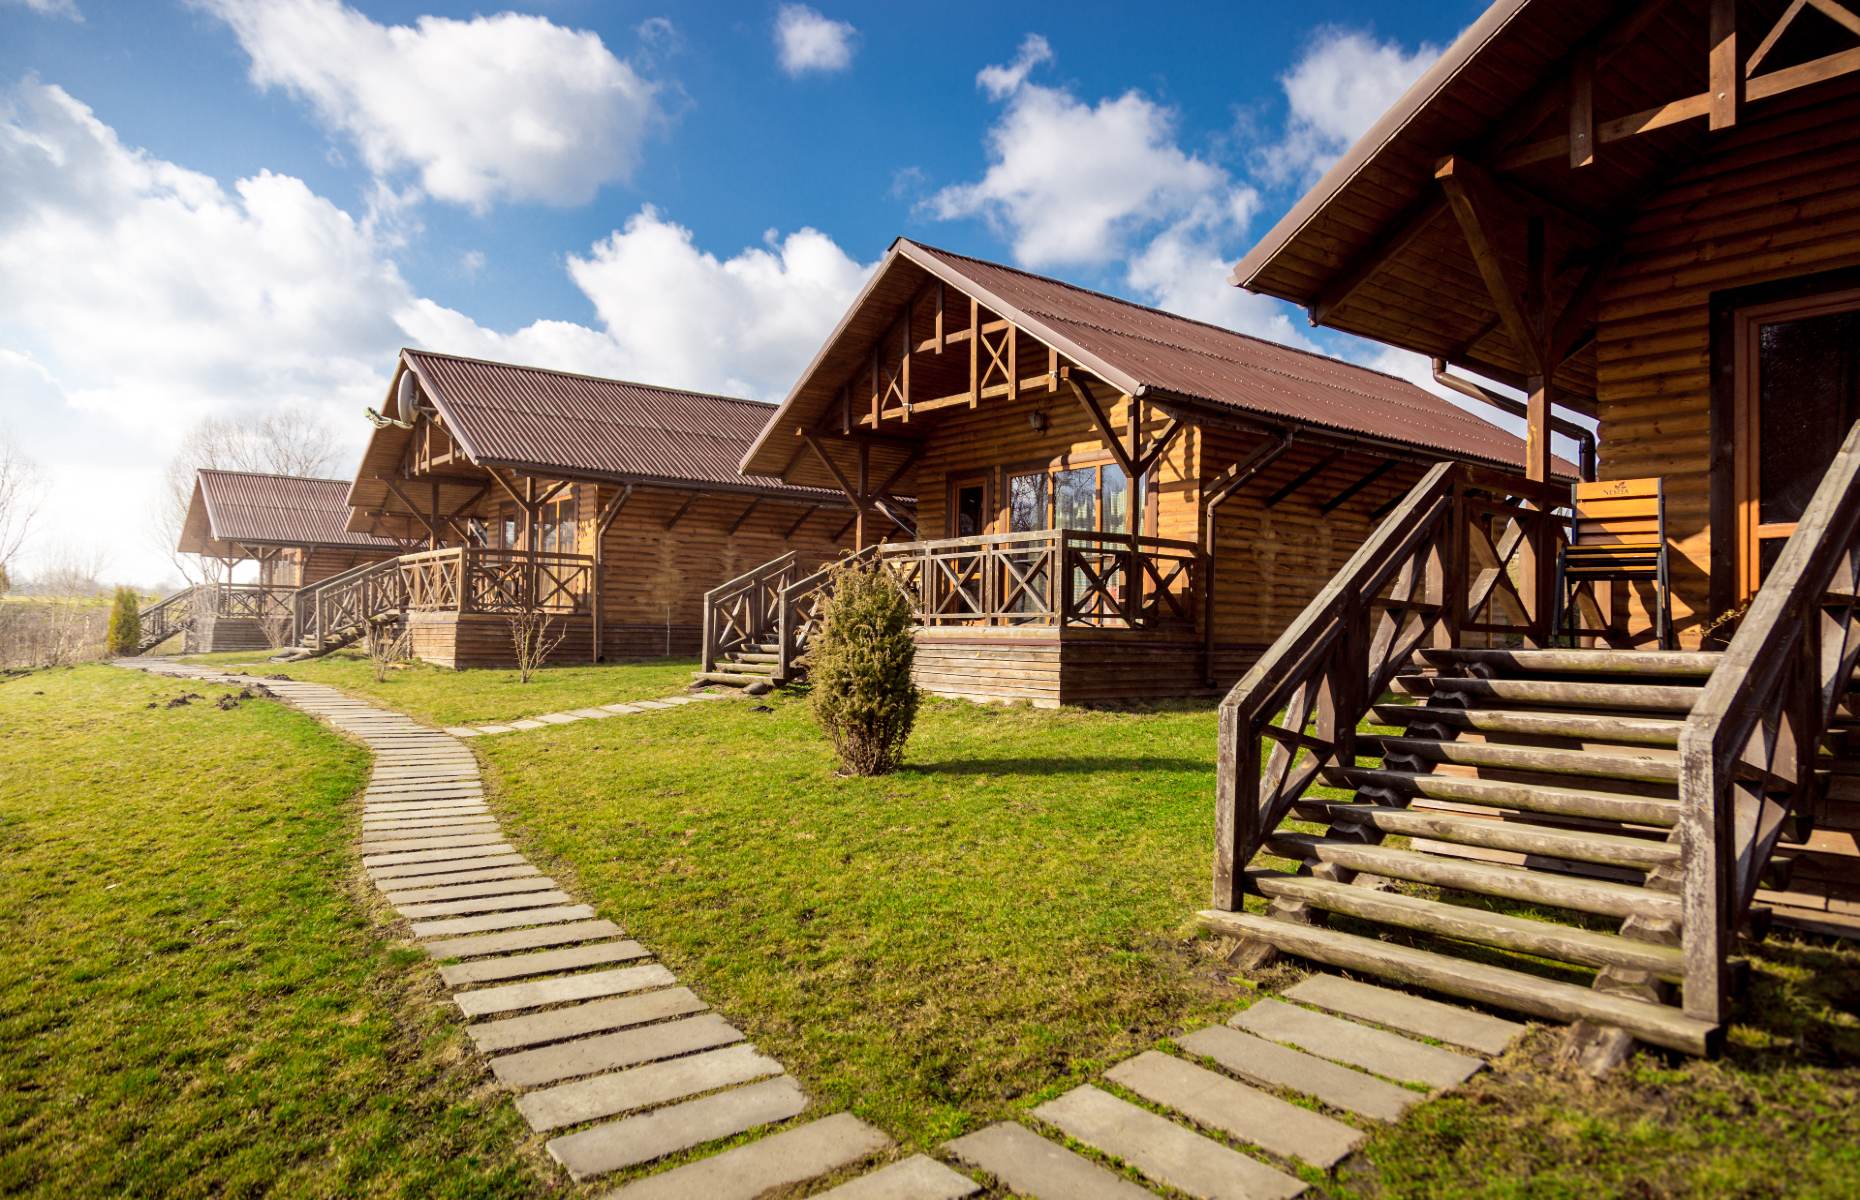 Holiday lodges in the countryside (kryzhov/Shutterstock)